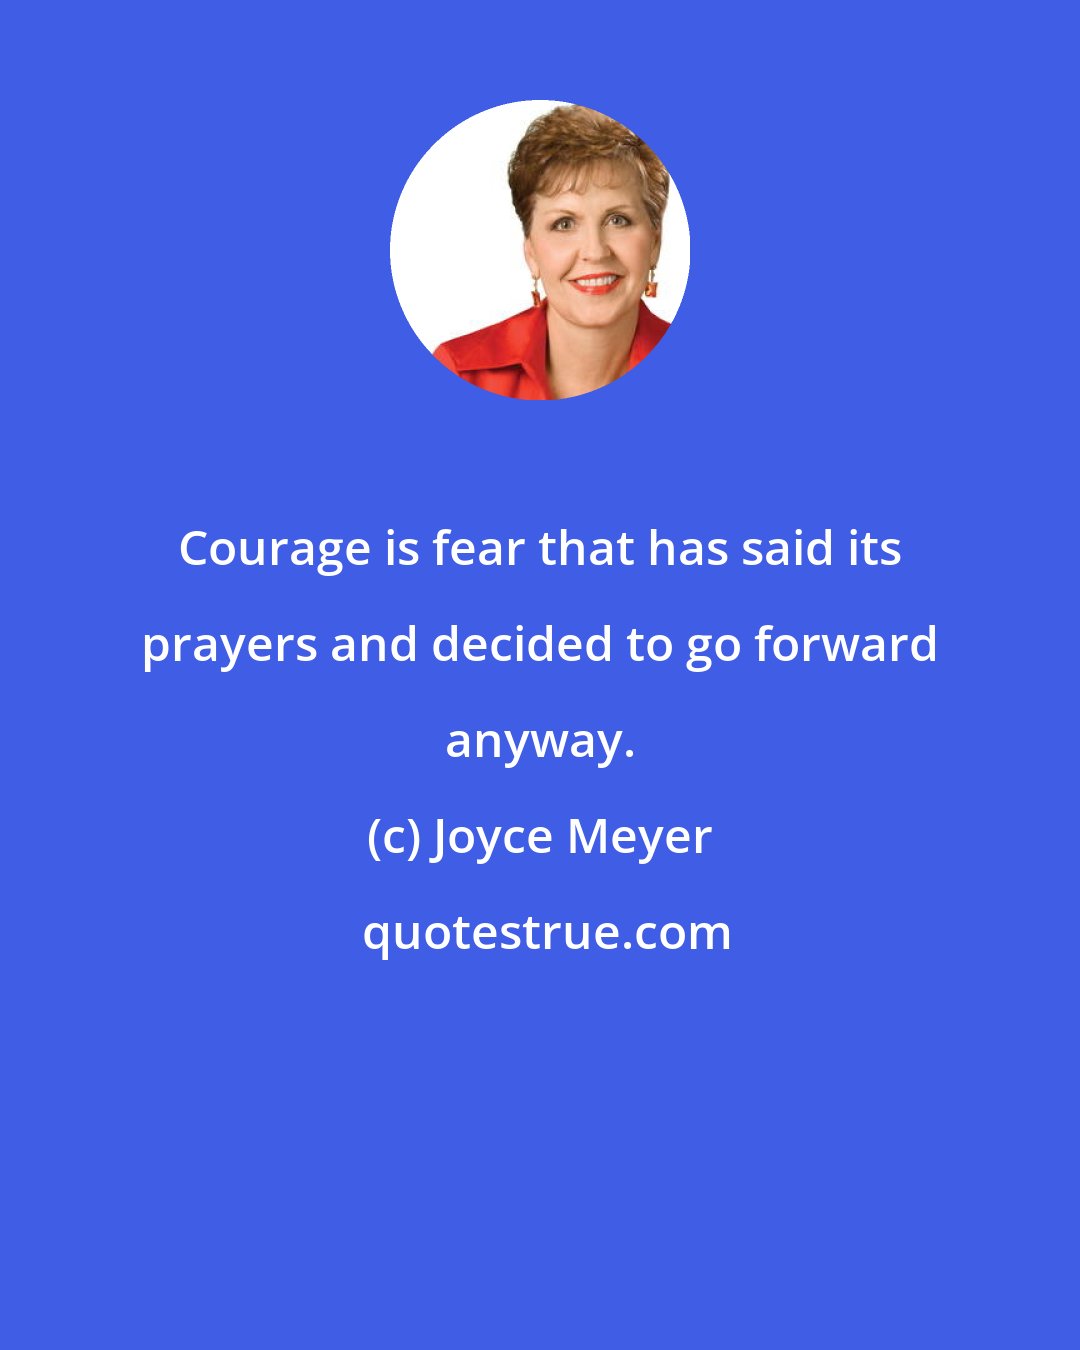 Joyce Meyer: Courage is fear that has said its prayers and decided to go forward anyway.